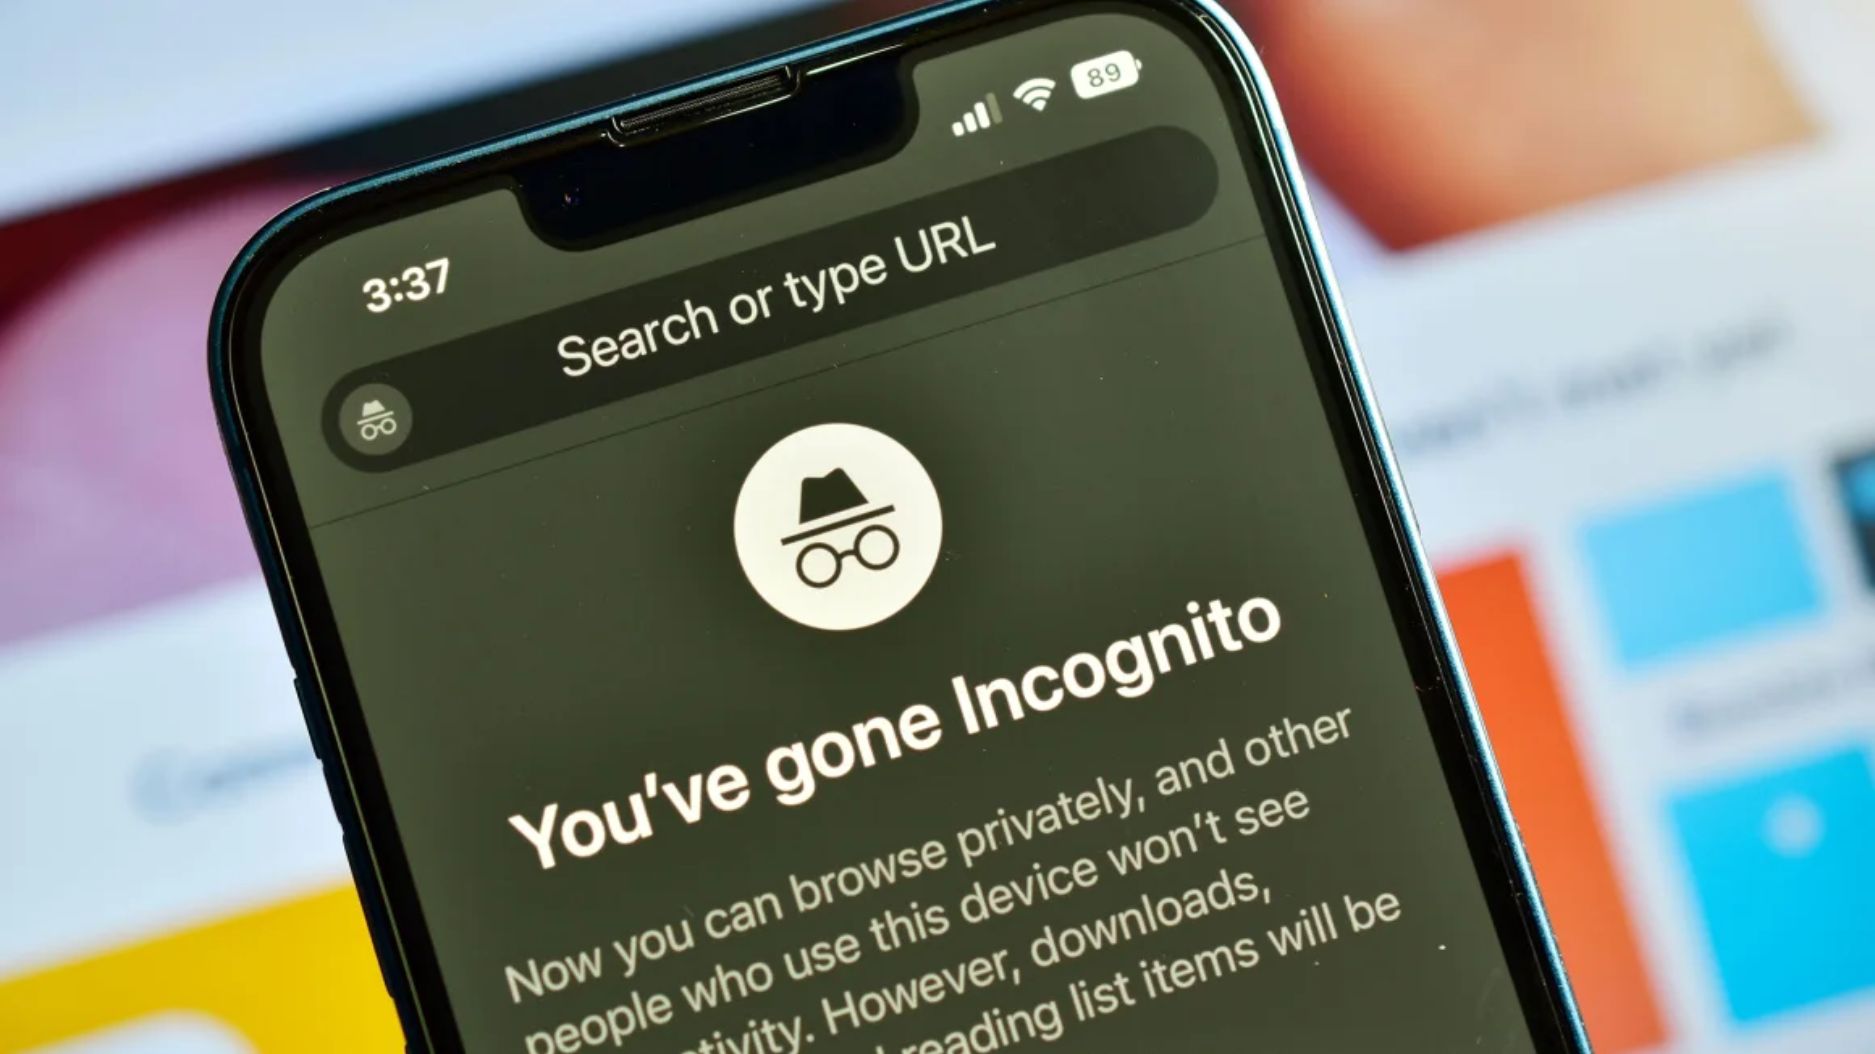 Due to a lawsuit, Google must delete browsing data in “Incognito” mode.